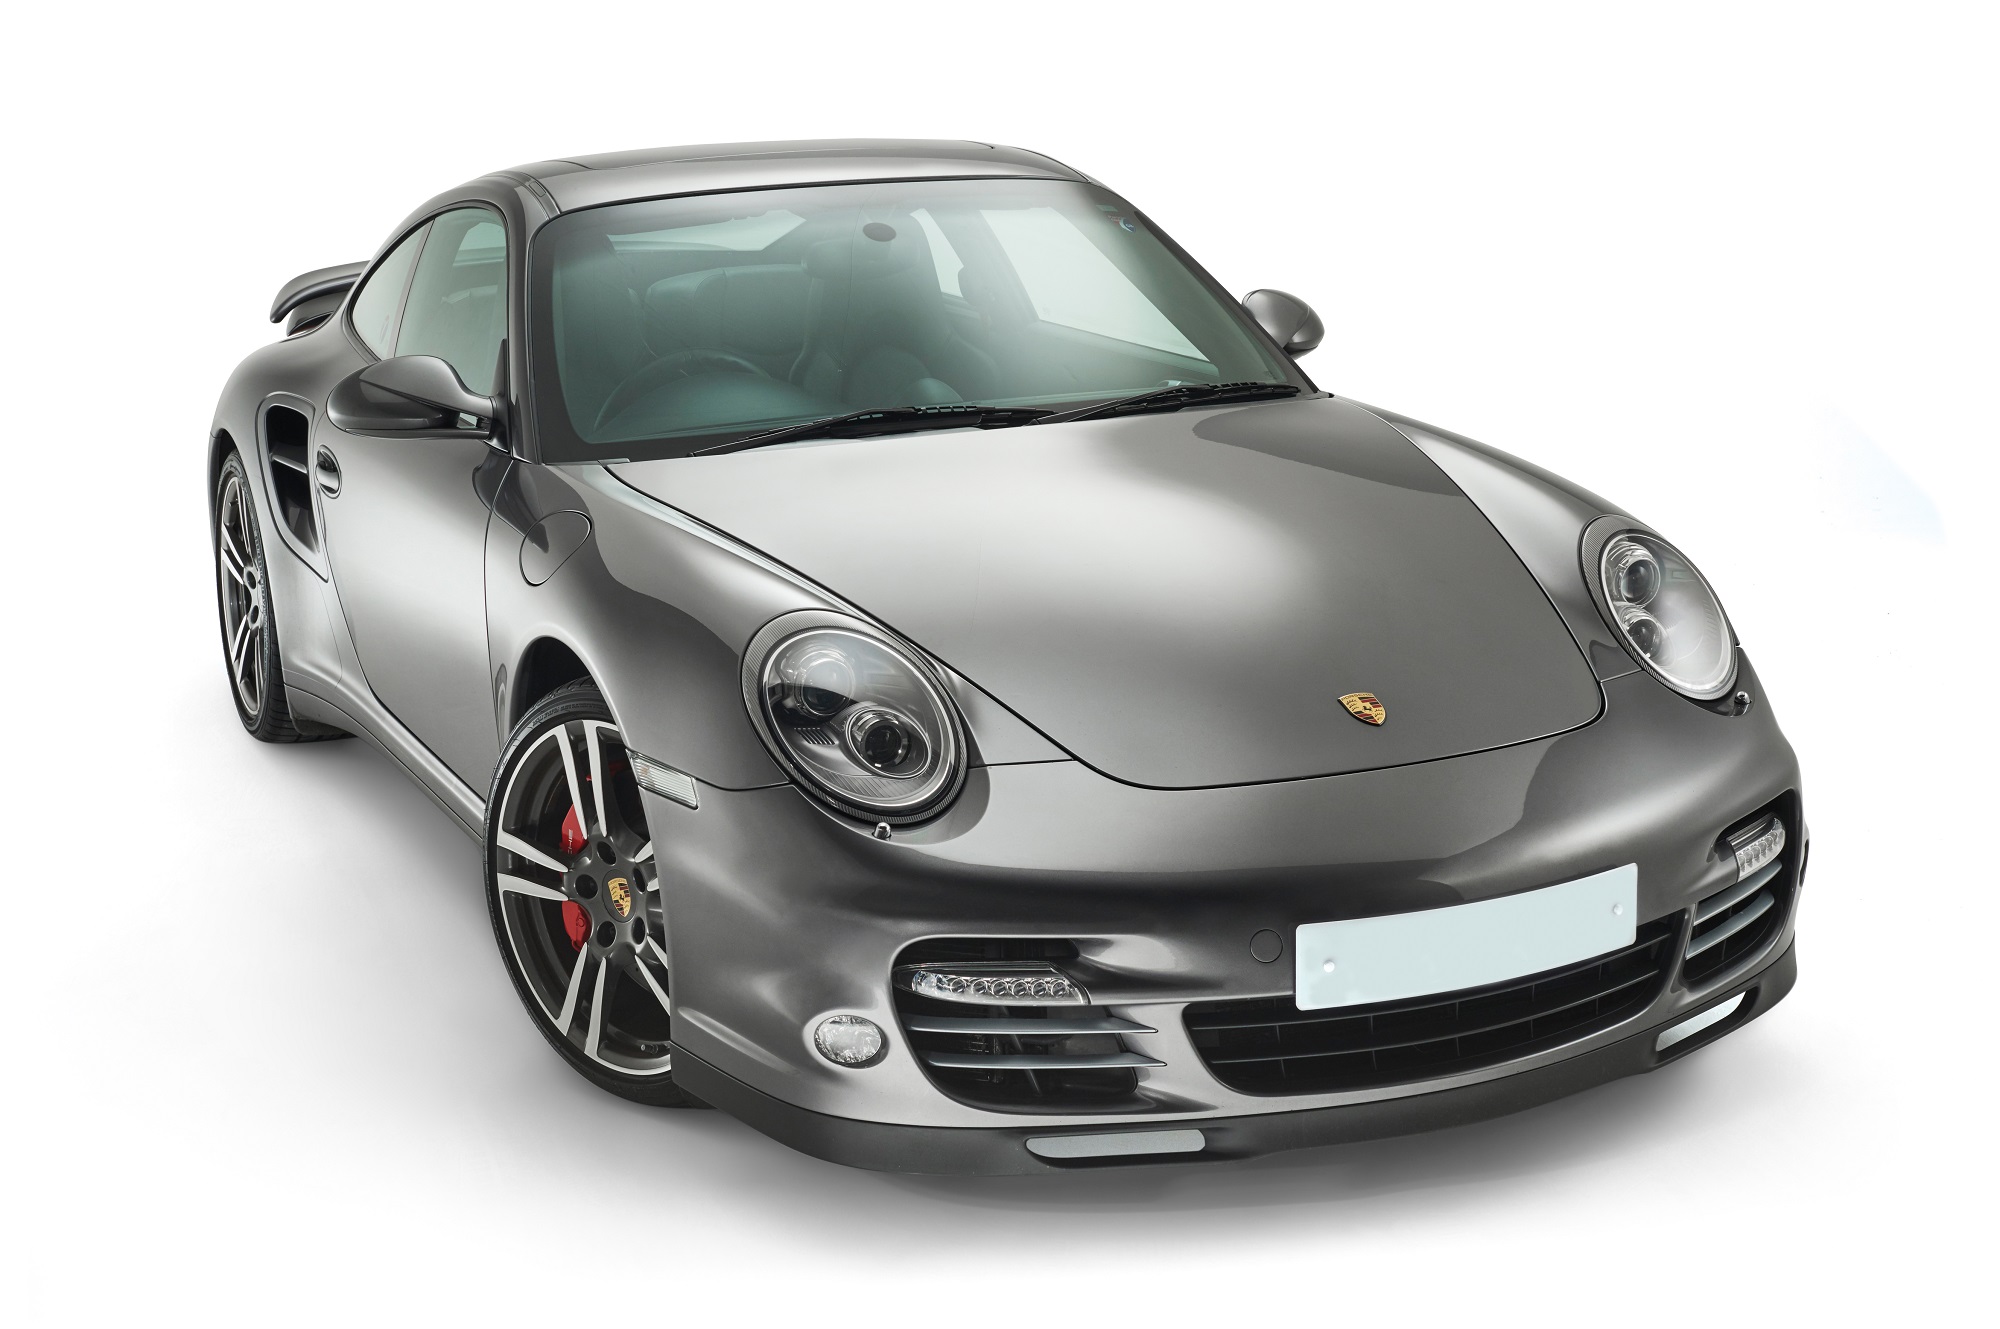 The 997 generation Porsche 911 Carrera 4 is a great daily driver performance car.